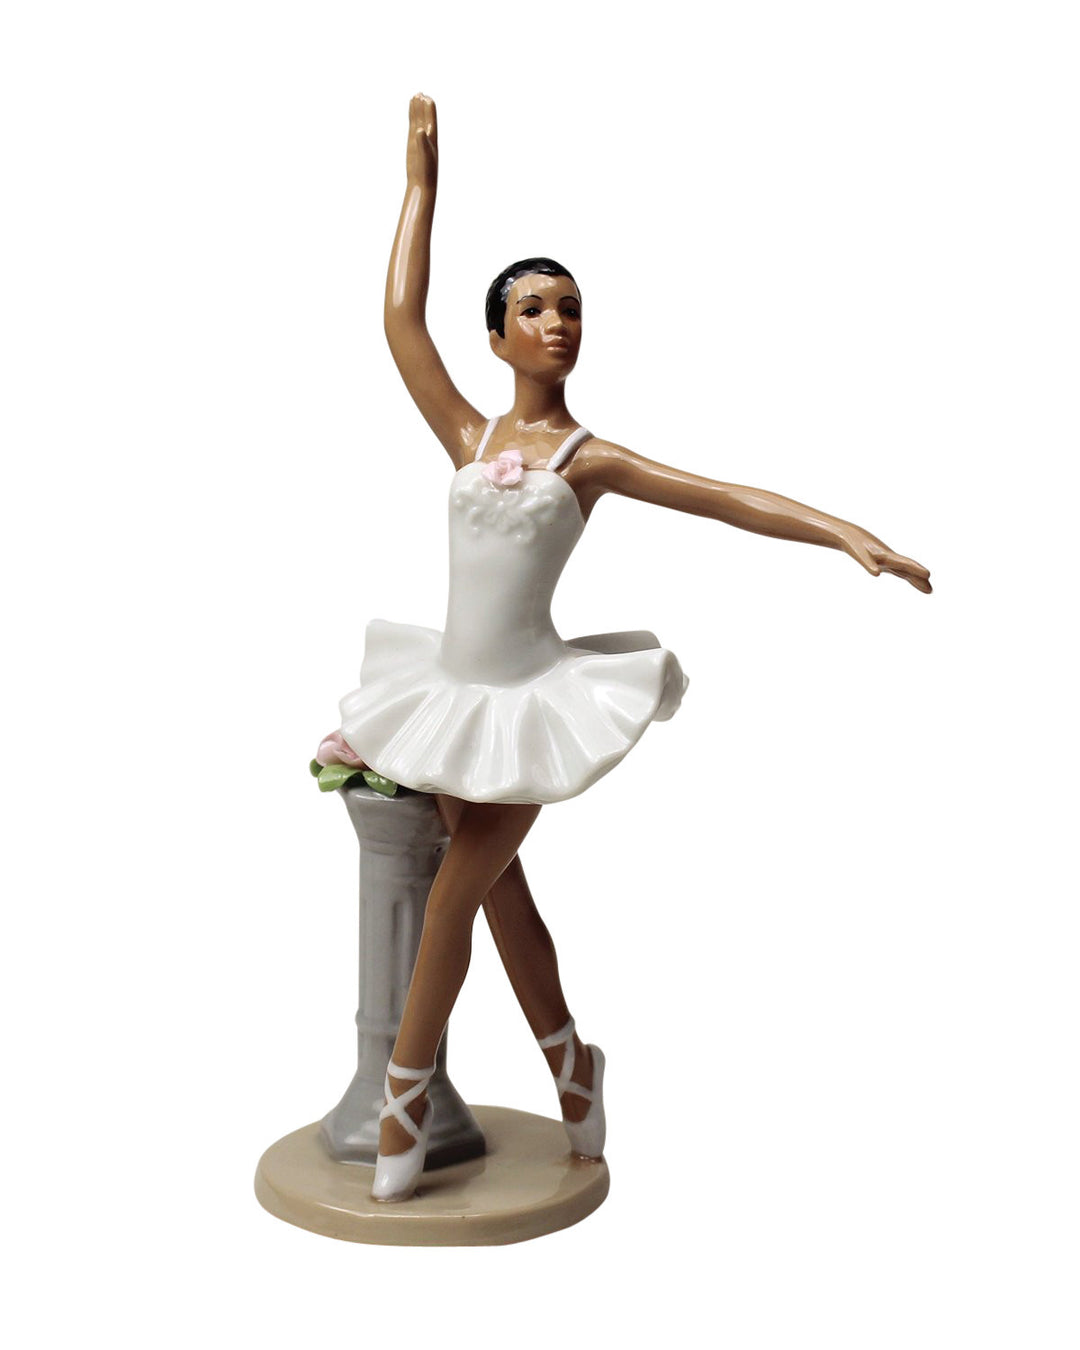 African American Ballerina in White Dress by Cosmos Gifts